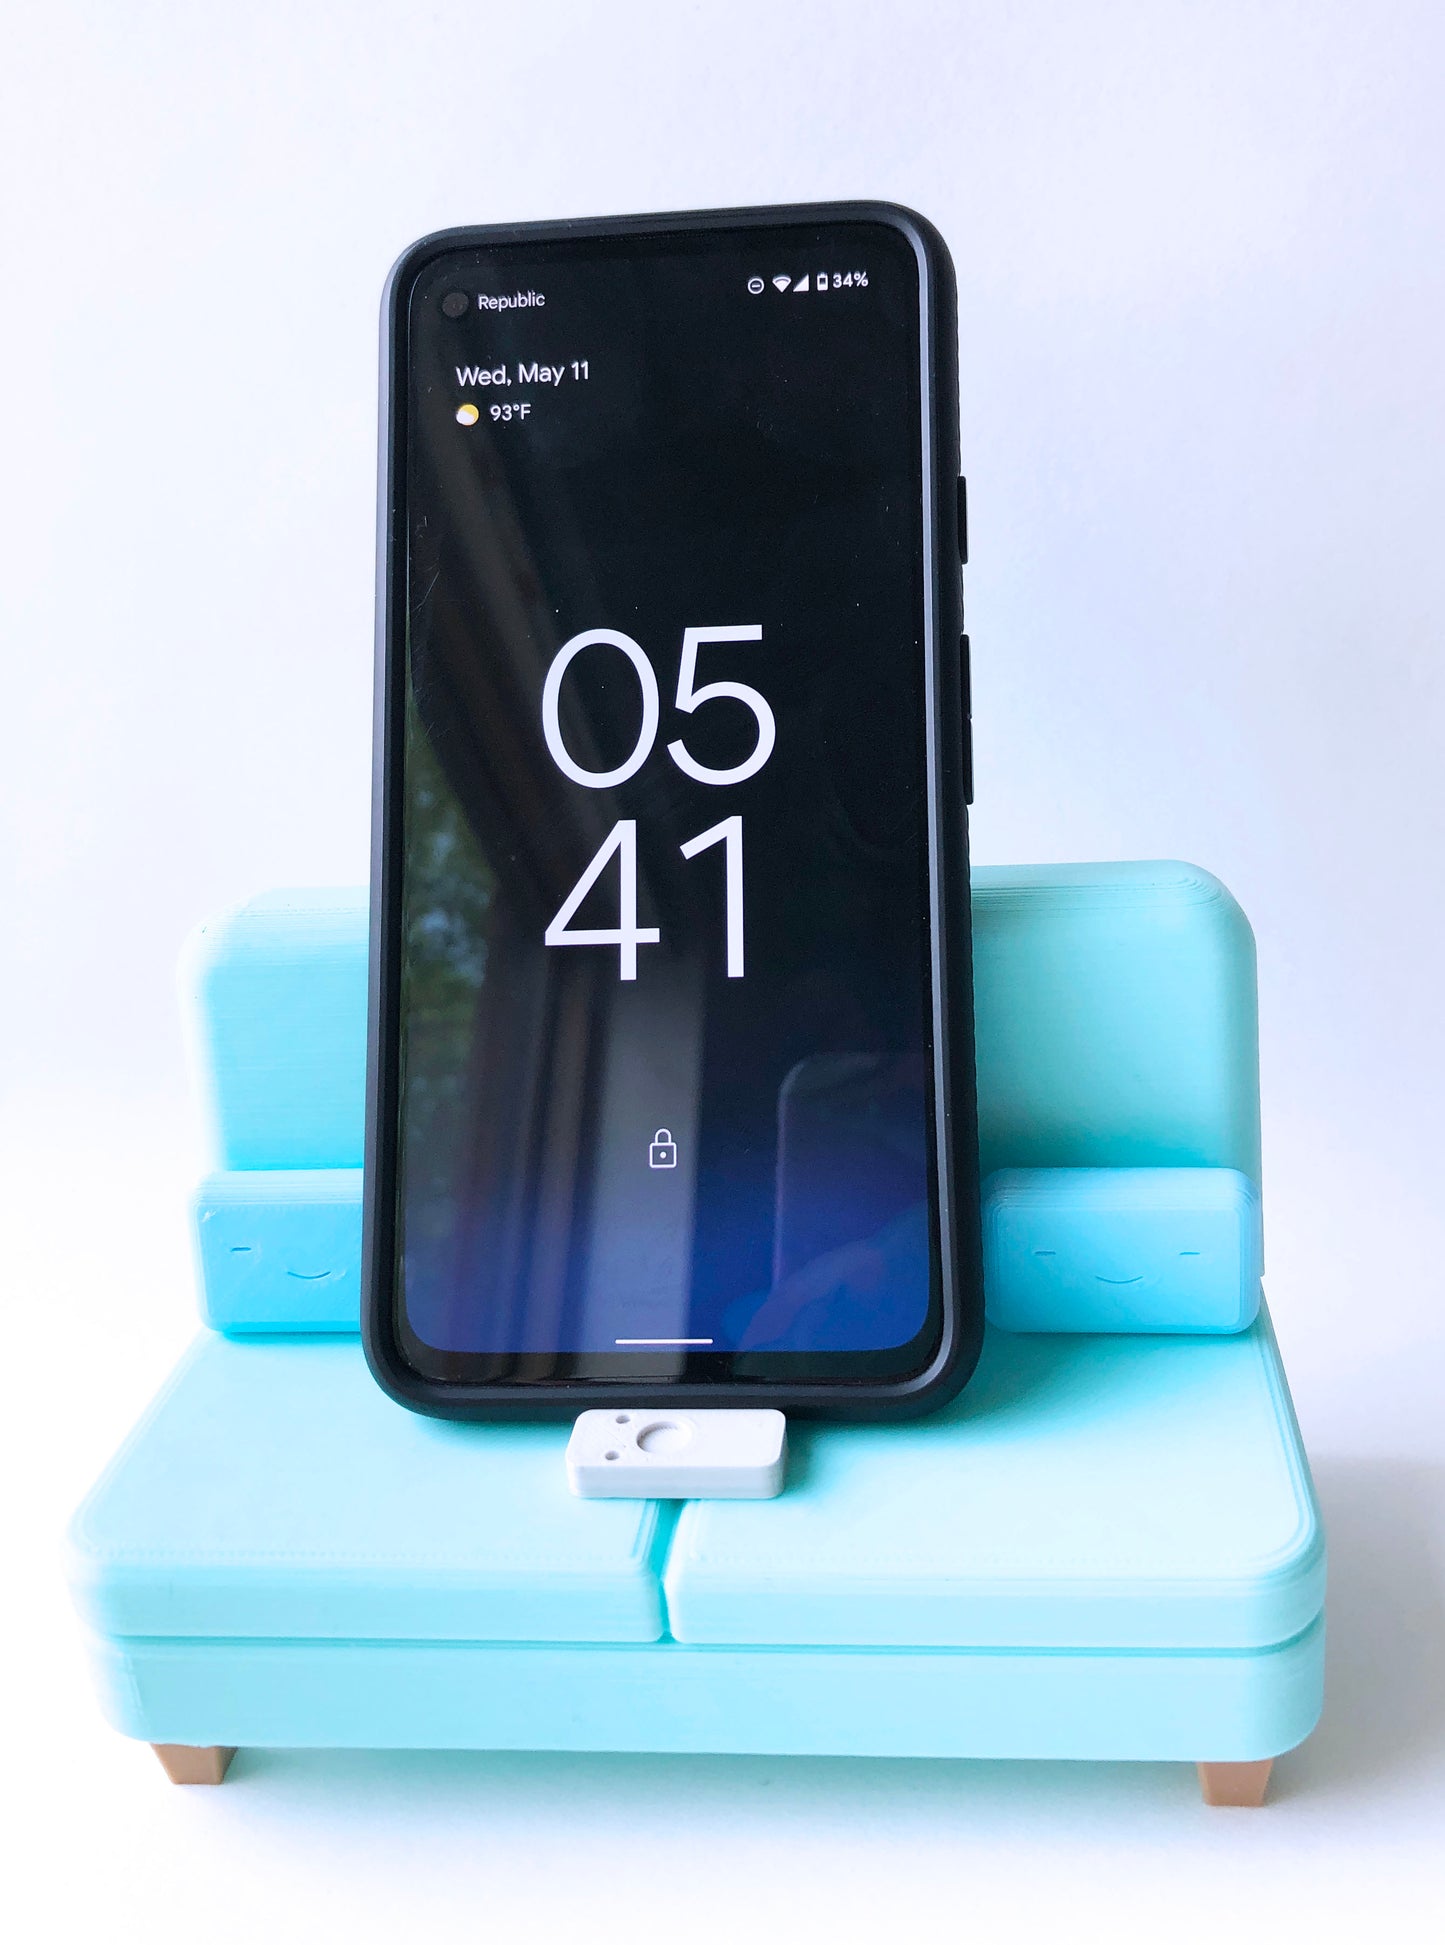 The Colab Couch Phone Holder with Remote and Pillows